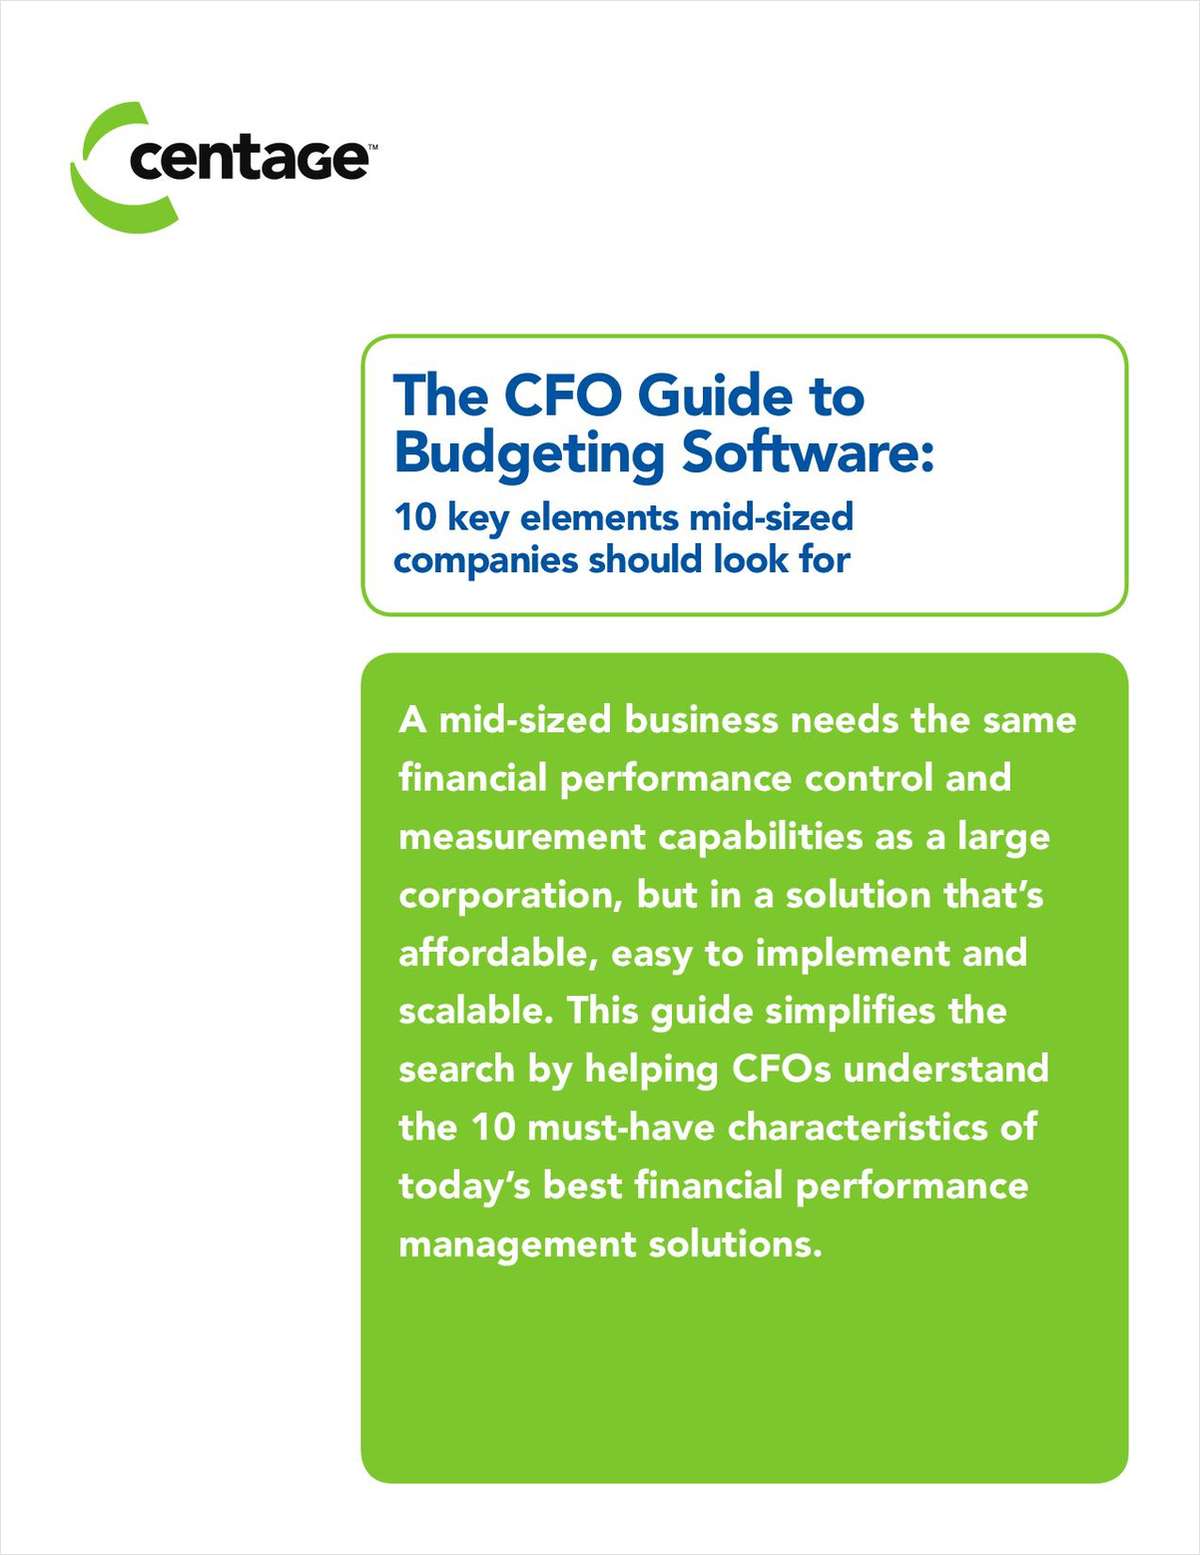 The CFO Guide to Budgeting Software: 10 key elements mid-sized companies should look for